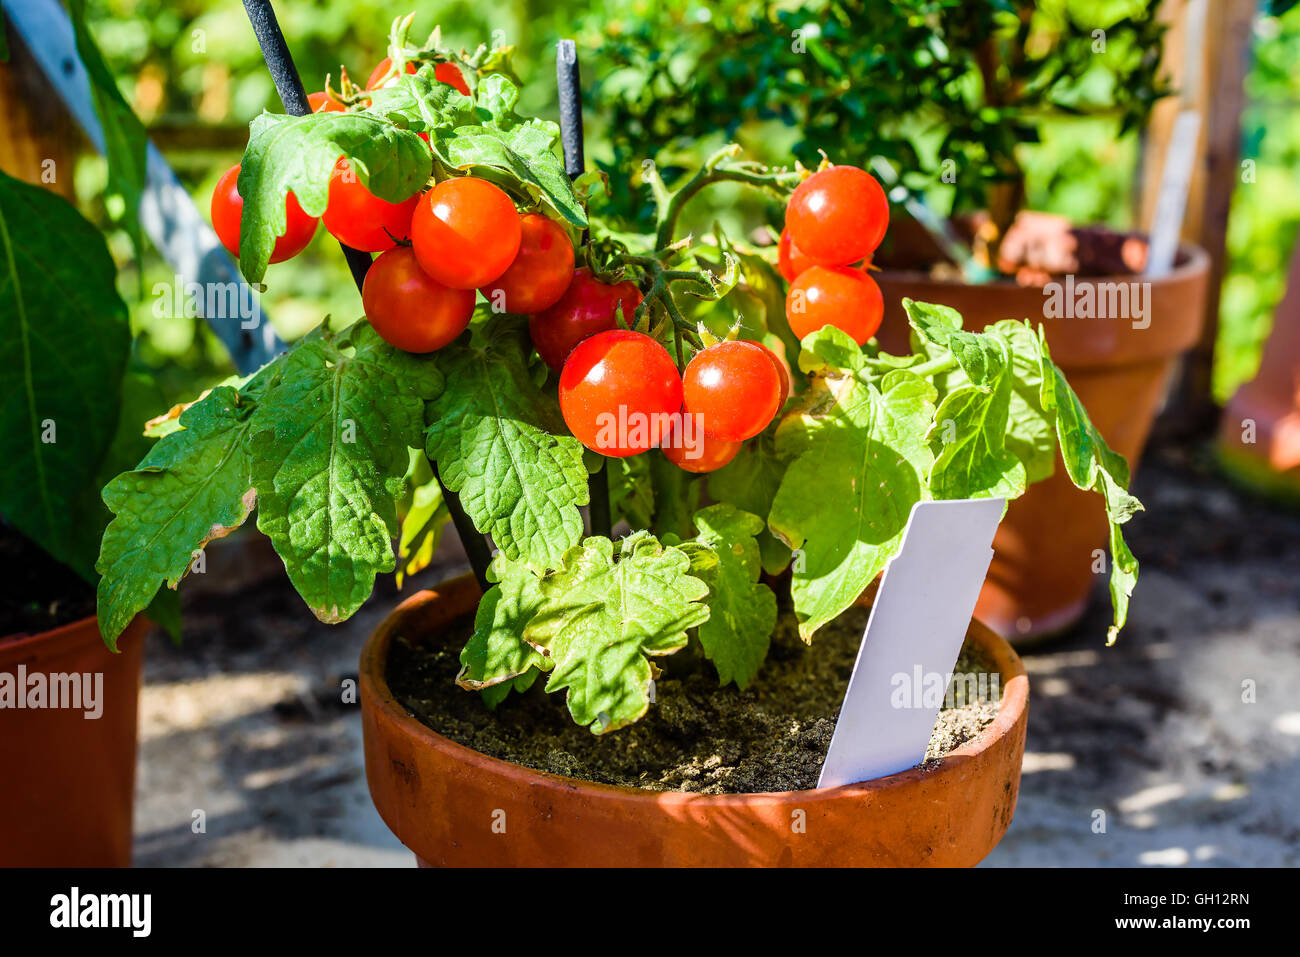 Lovely small cherry tomato plant with ripe and tasty tomatoes on it. White empty marker in pot. Stock Photo